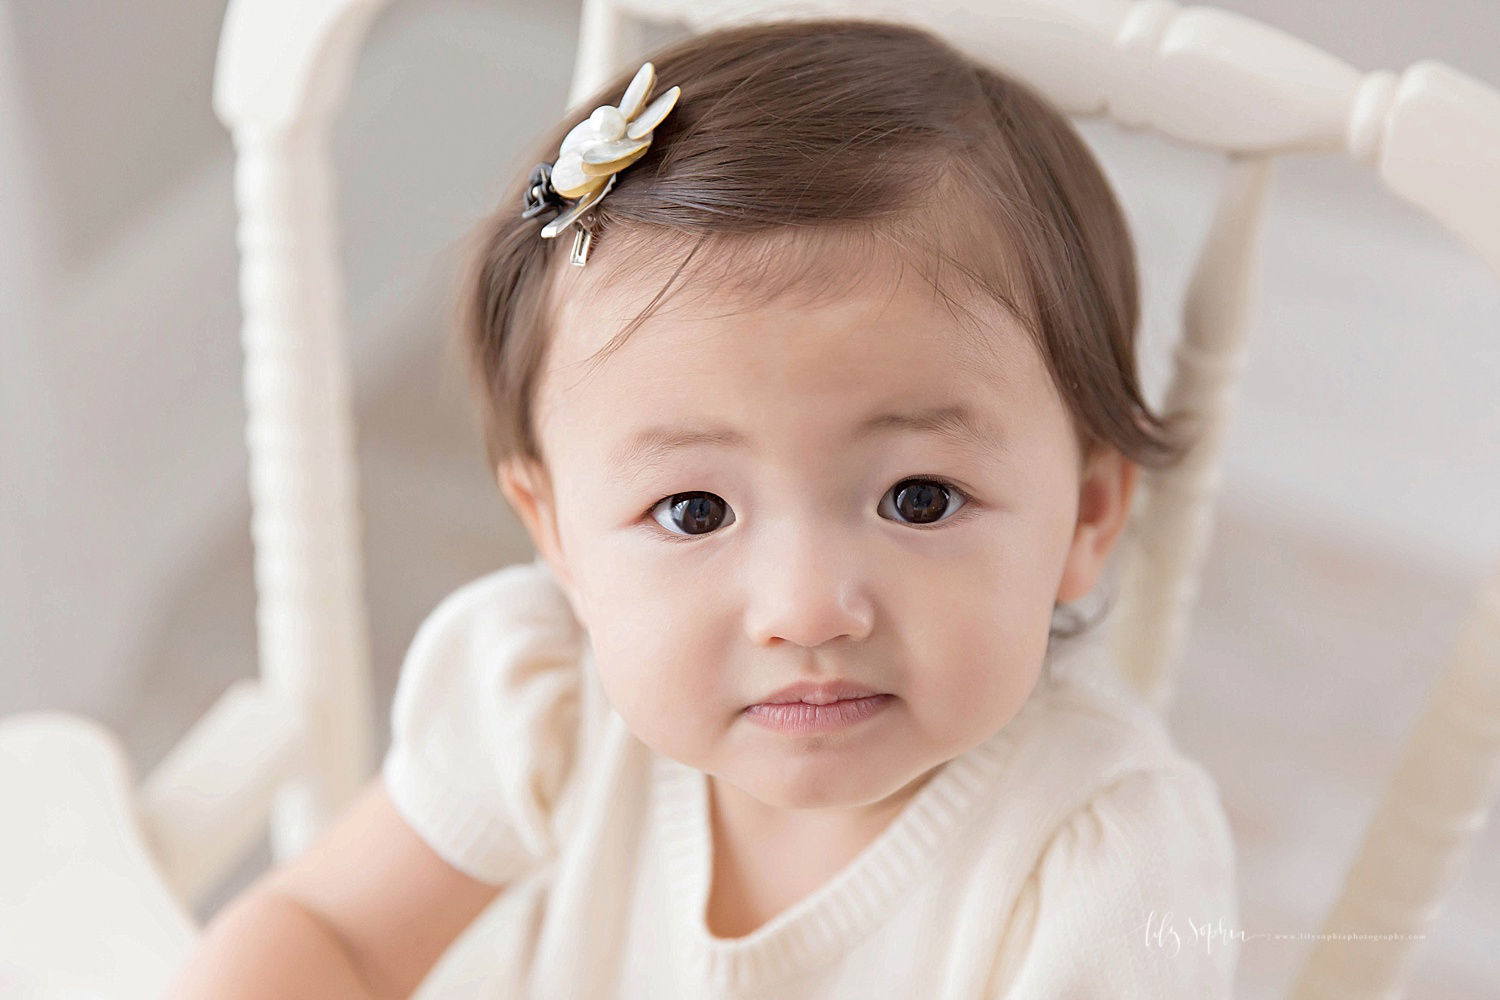  Image of an Asian, baby, girl wearing a cream shirt with a flower clip in her hair, sitting in an antique wooden high chair, and looking up at the camera.&nbsp; 